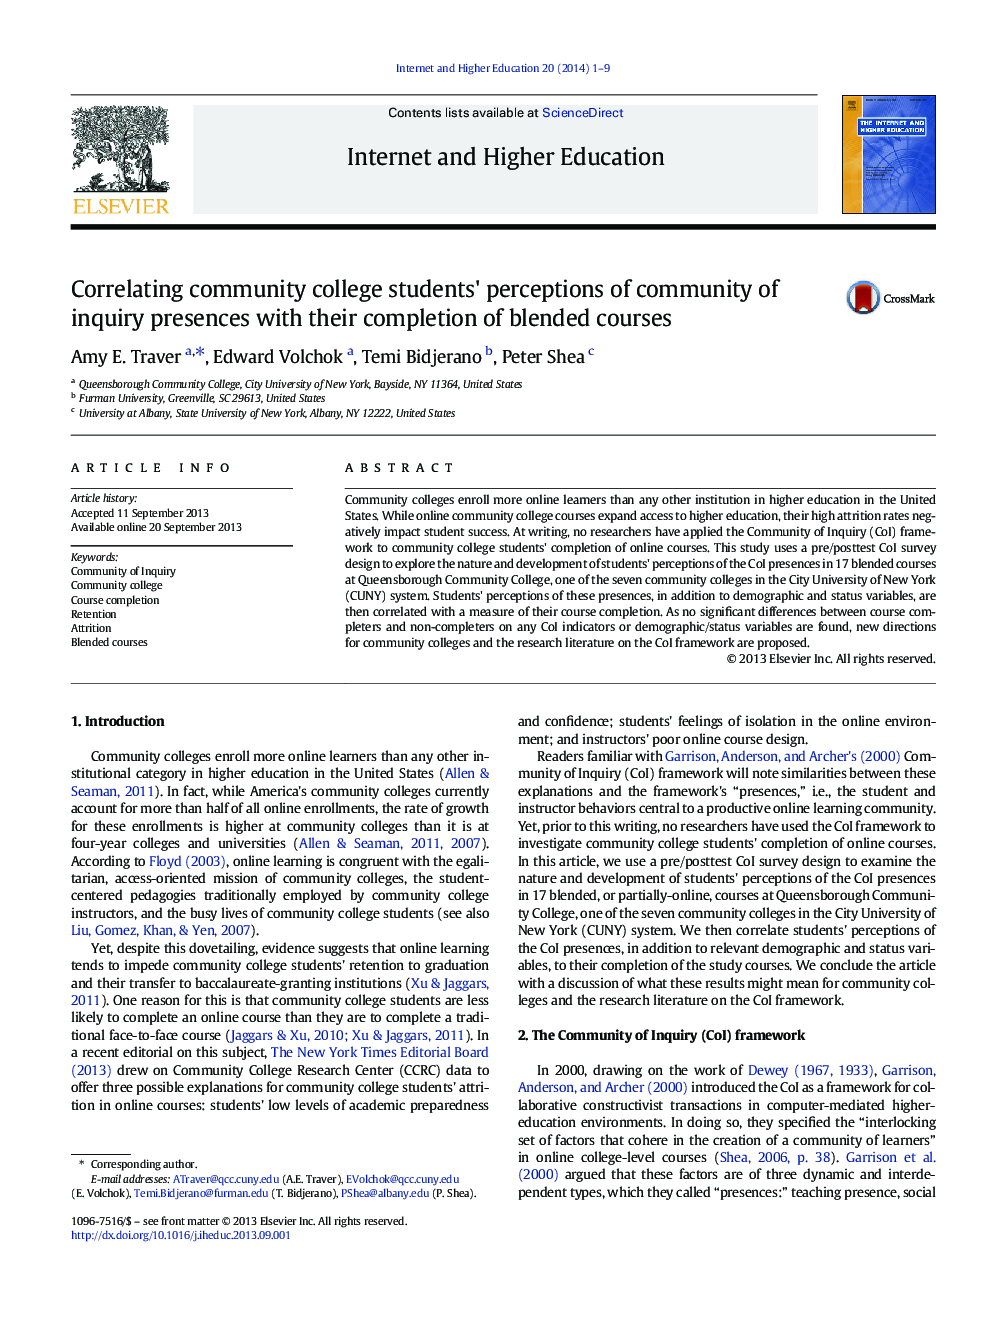 Correlating community college students' perceptions of community of inquiry presences with their completion of blended courses